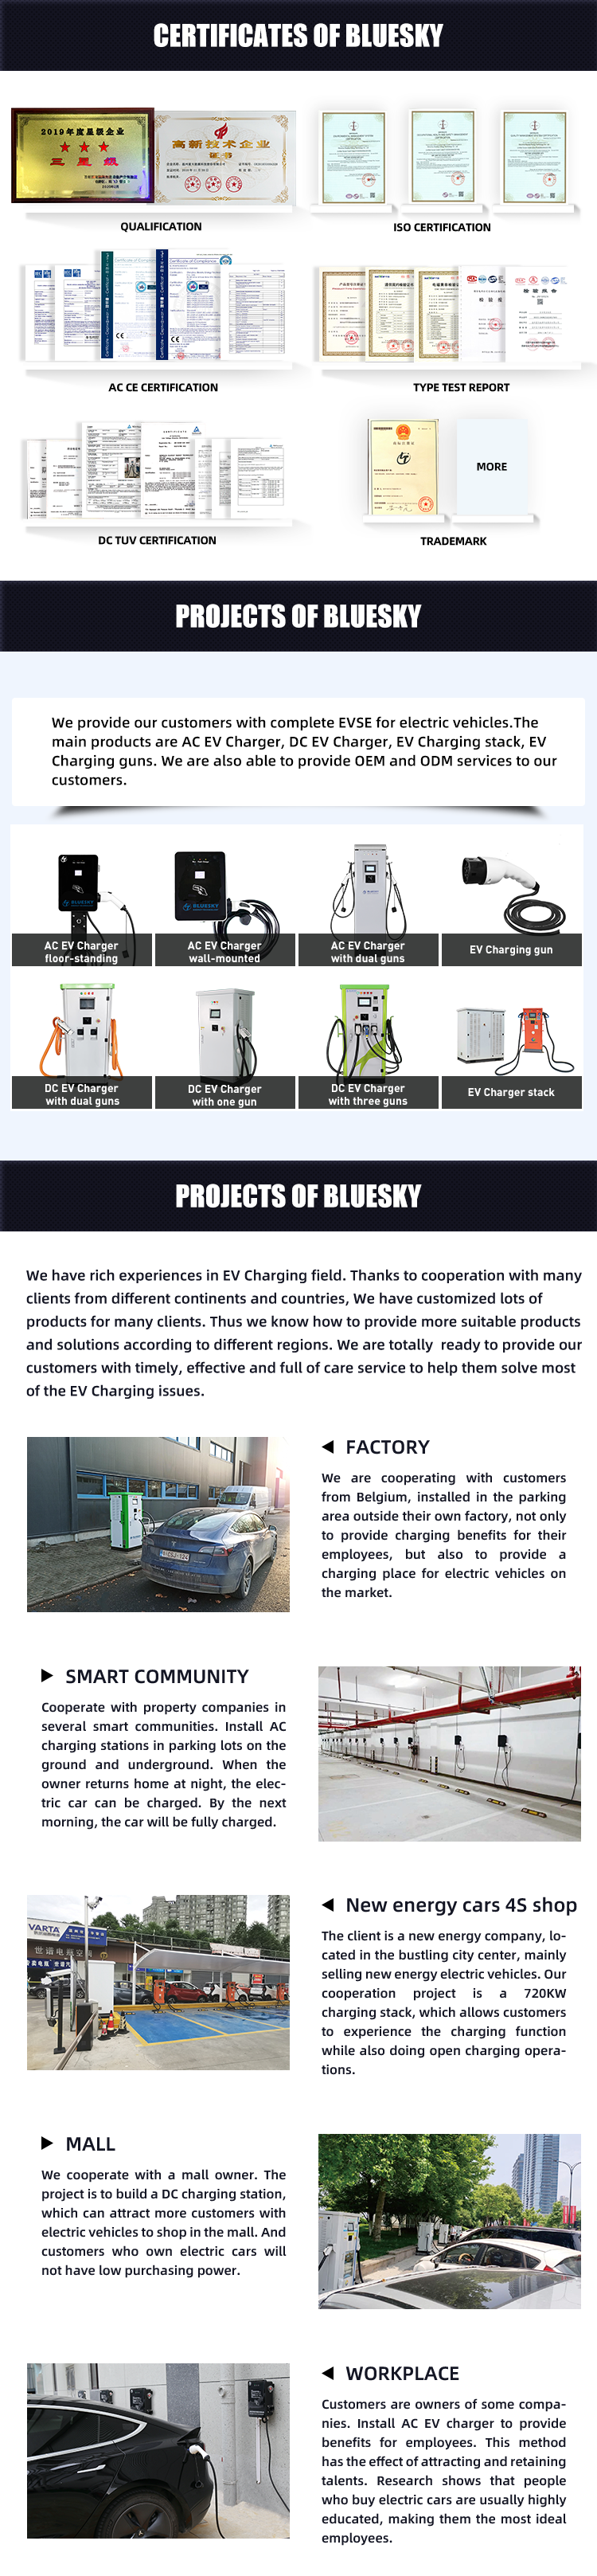 82kw AC/DC Integrated Public EV Charger Two Chademo+22kw Type2 Fast EV Charger